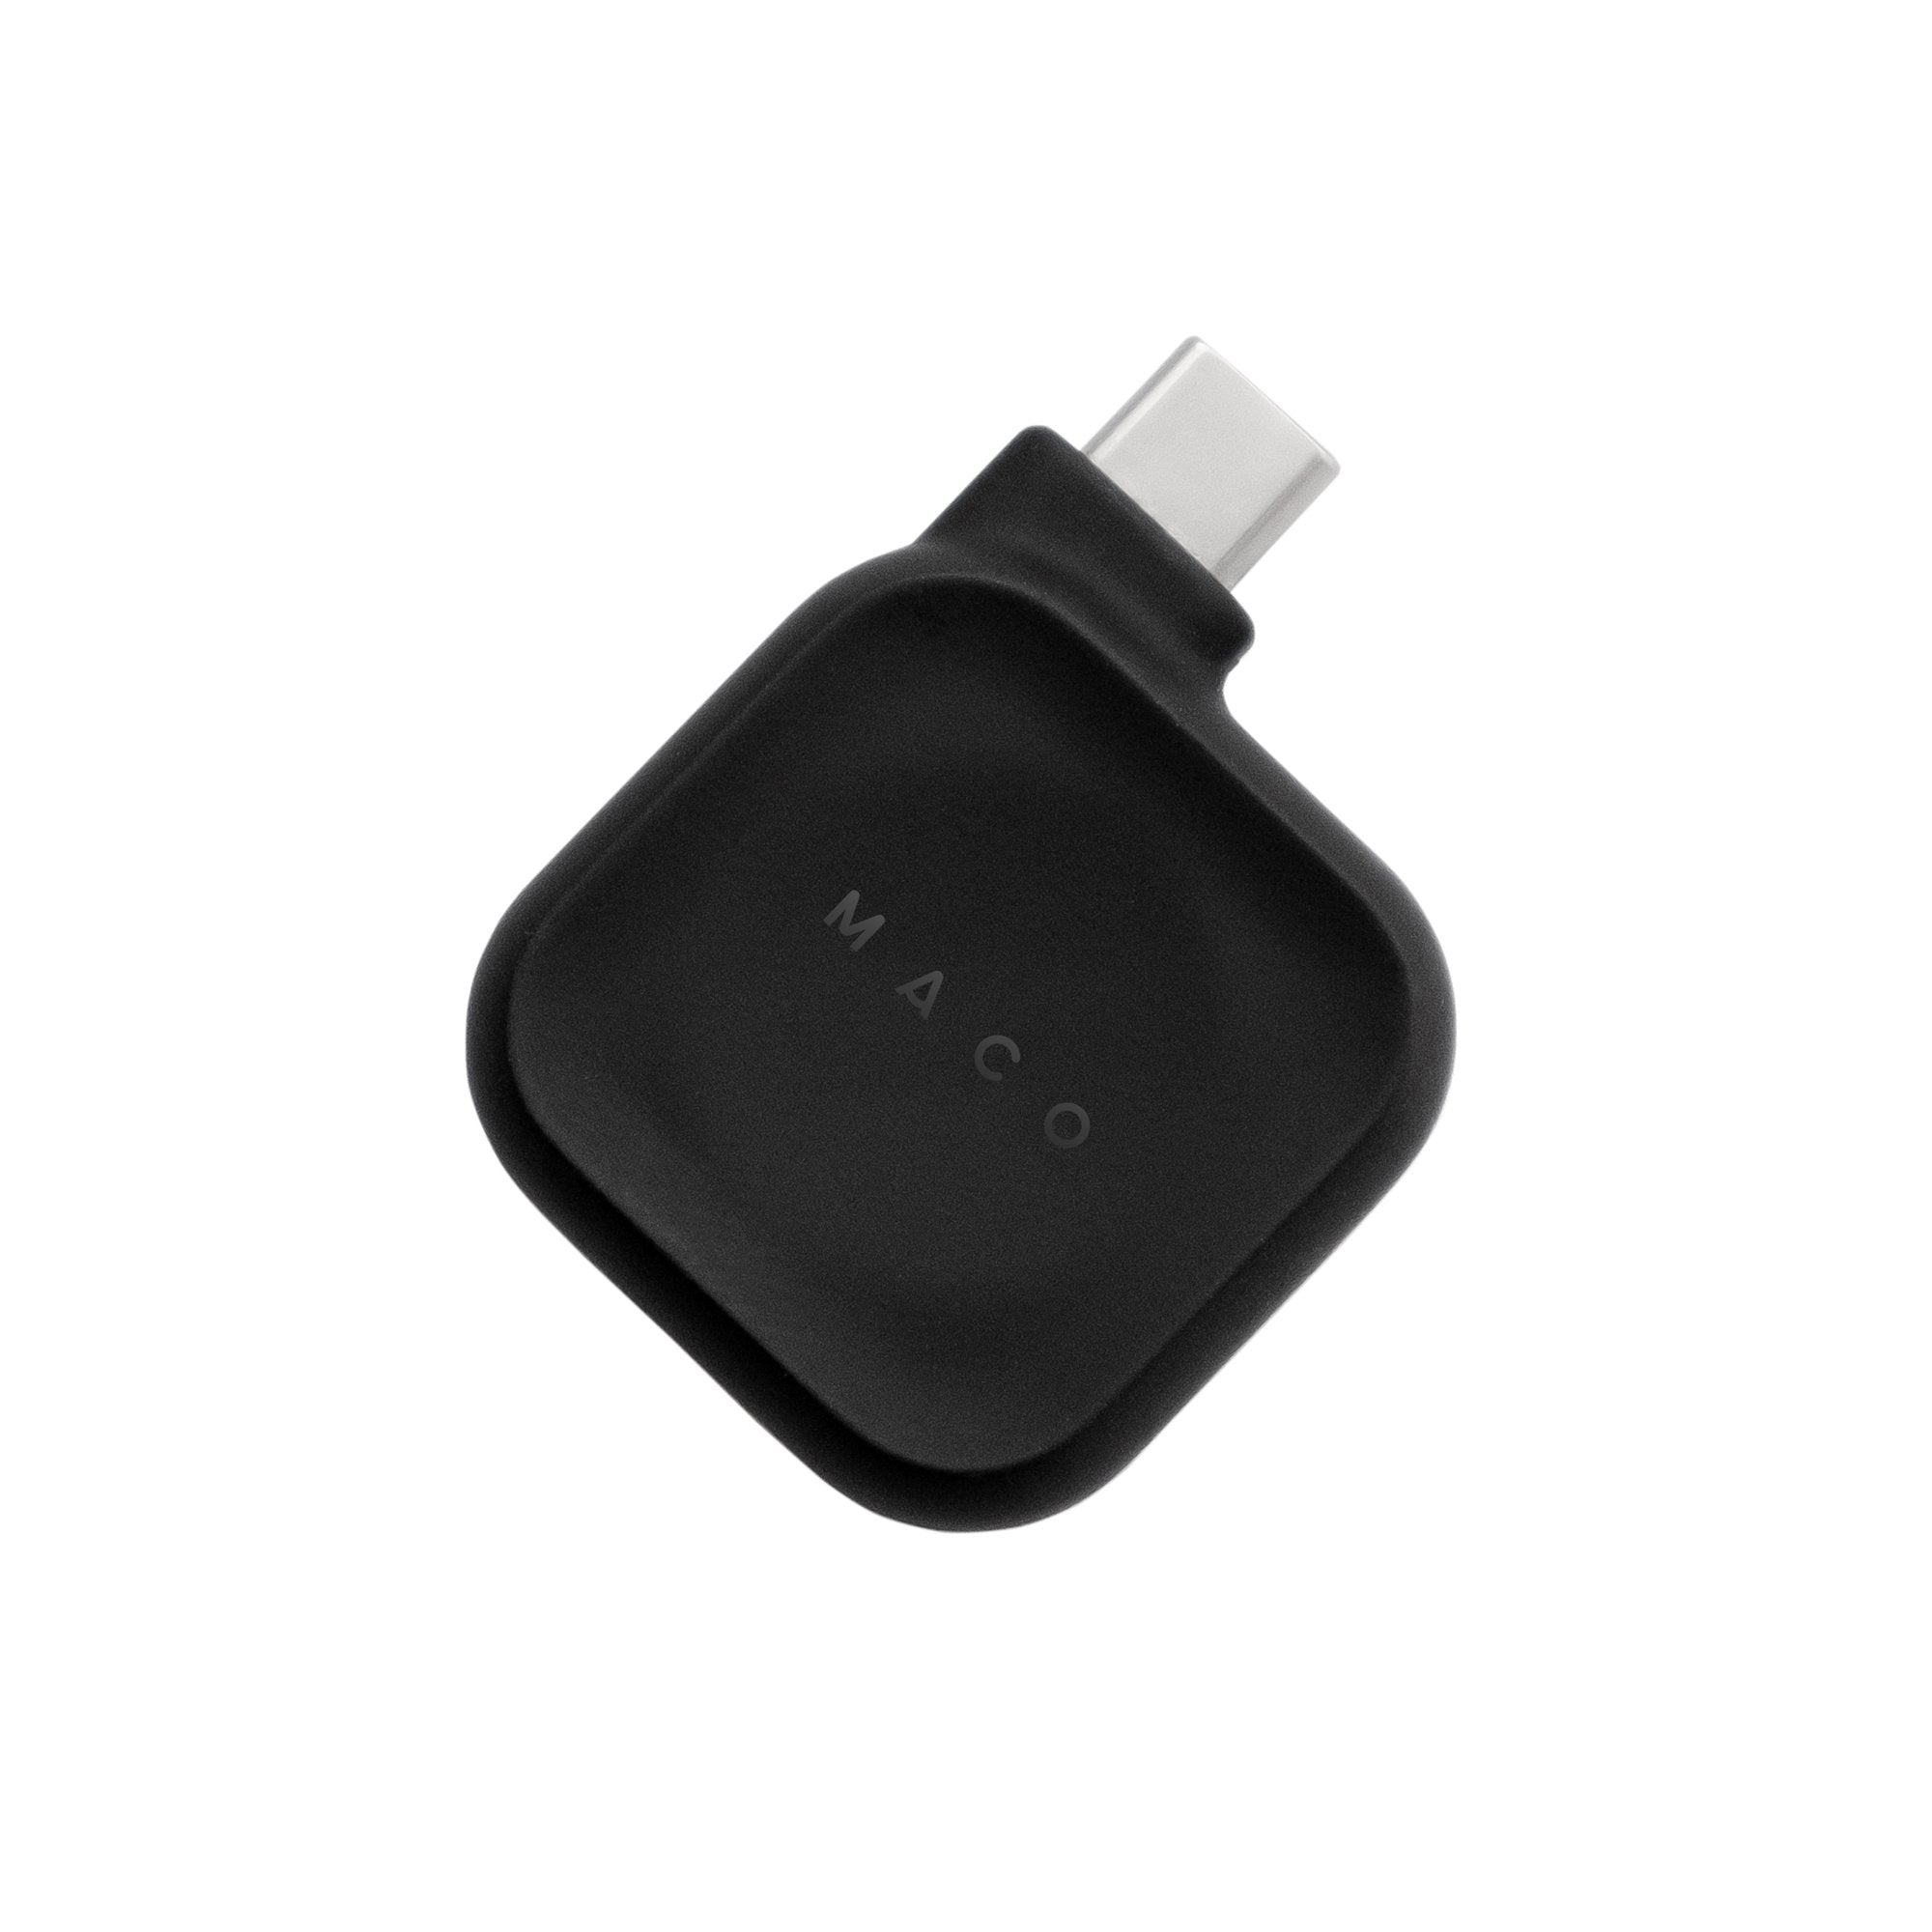 Maco Go - Smallest Apple Watch Charger - Storming Gravity